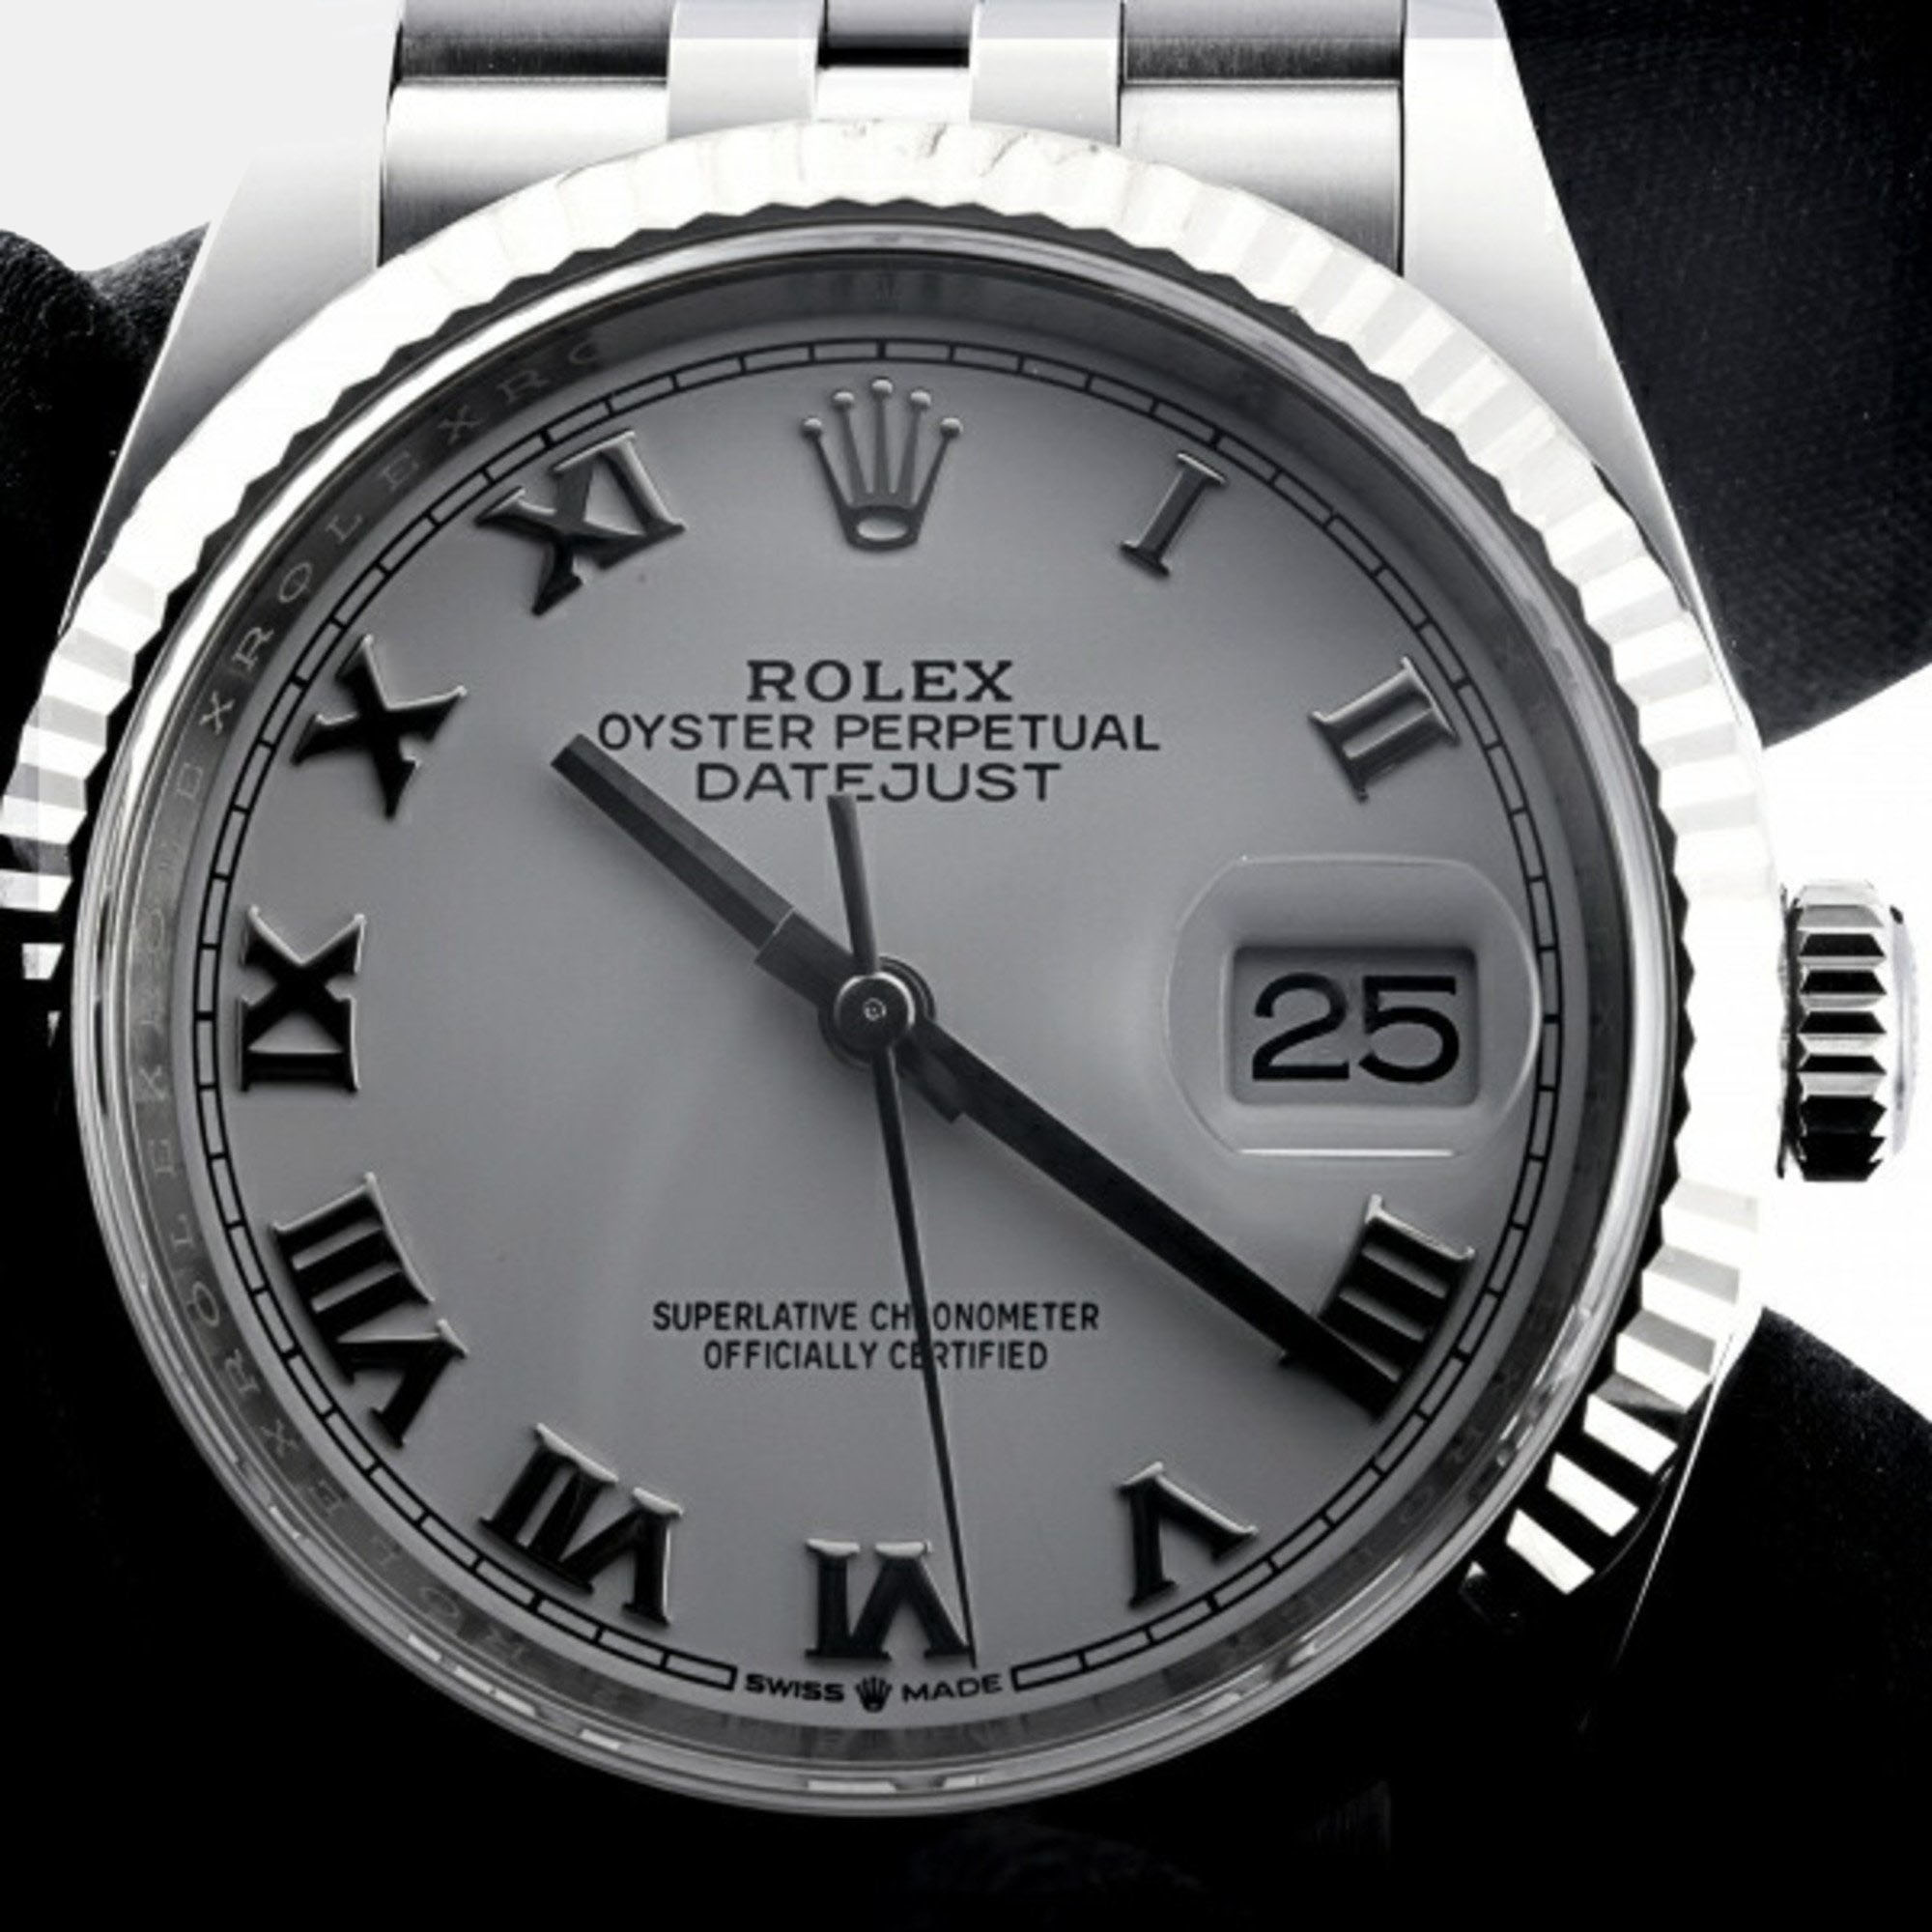 Rolex White 18k White Gold And Stainless Steel Datejust 126234 Automatic Men's Wristwatch 36 Mm